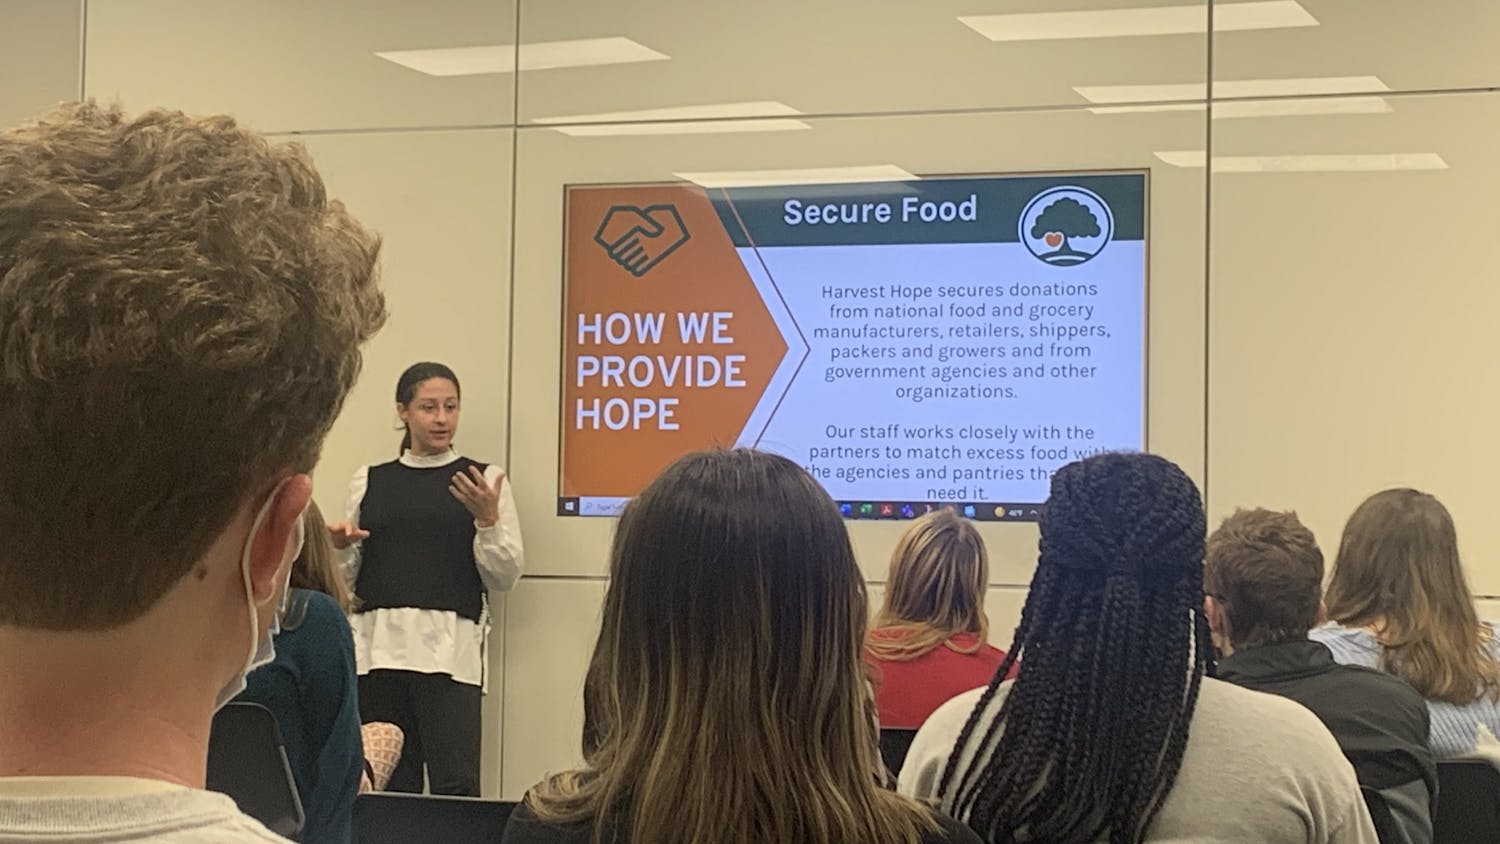 The Harvest Hope presentation was held at Russell House in Room 303 6-7:30 p.m. Presentation was about how they provide hope — that Harvest Hope secures donations from national food and grocery manufacturers, retailers, shippers, packers and growers and from government agencies and other organizations.&nbsp;